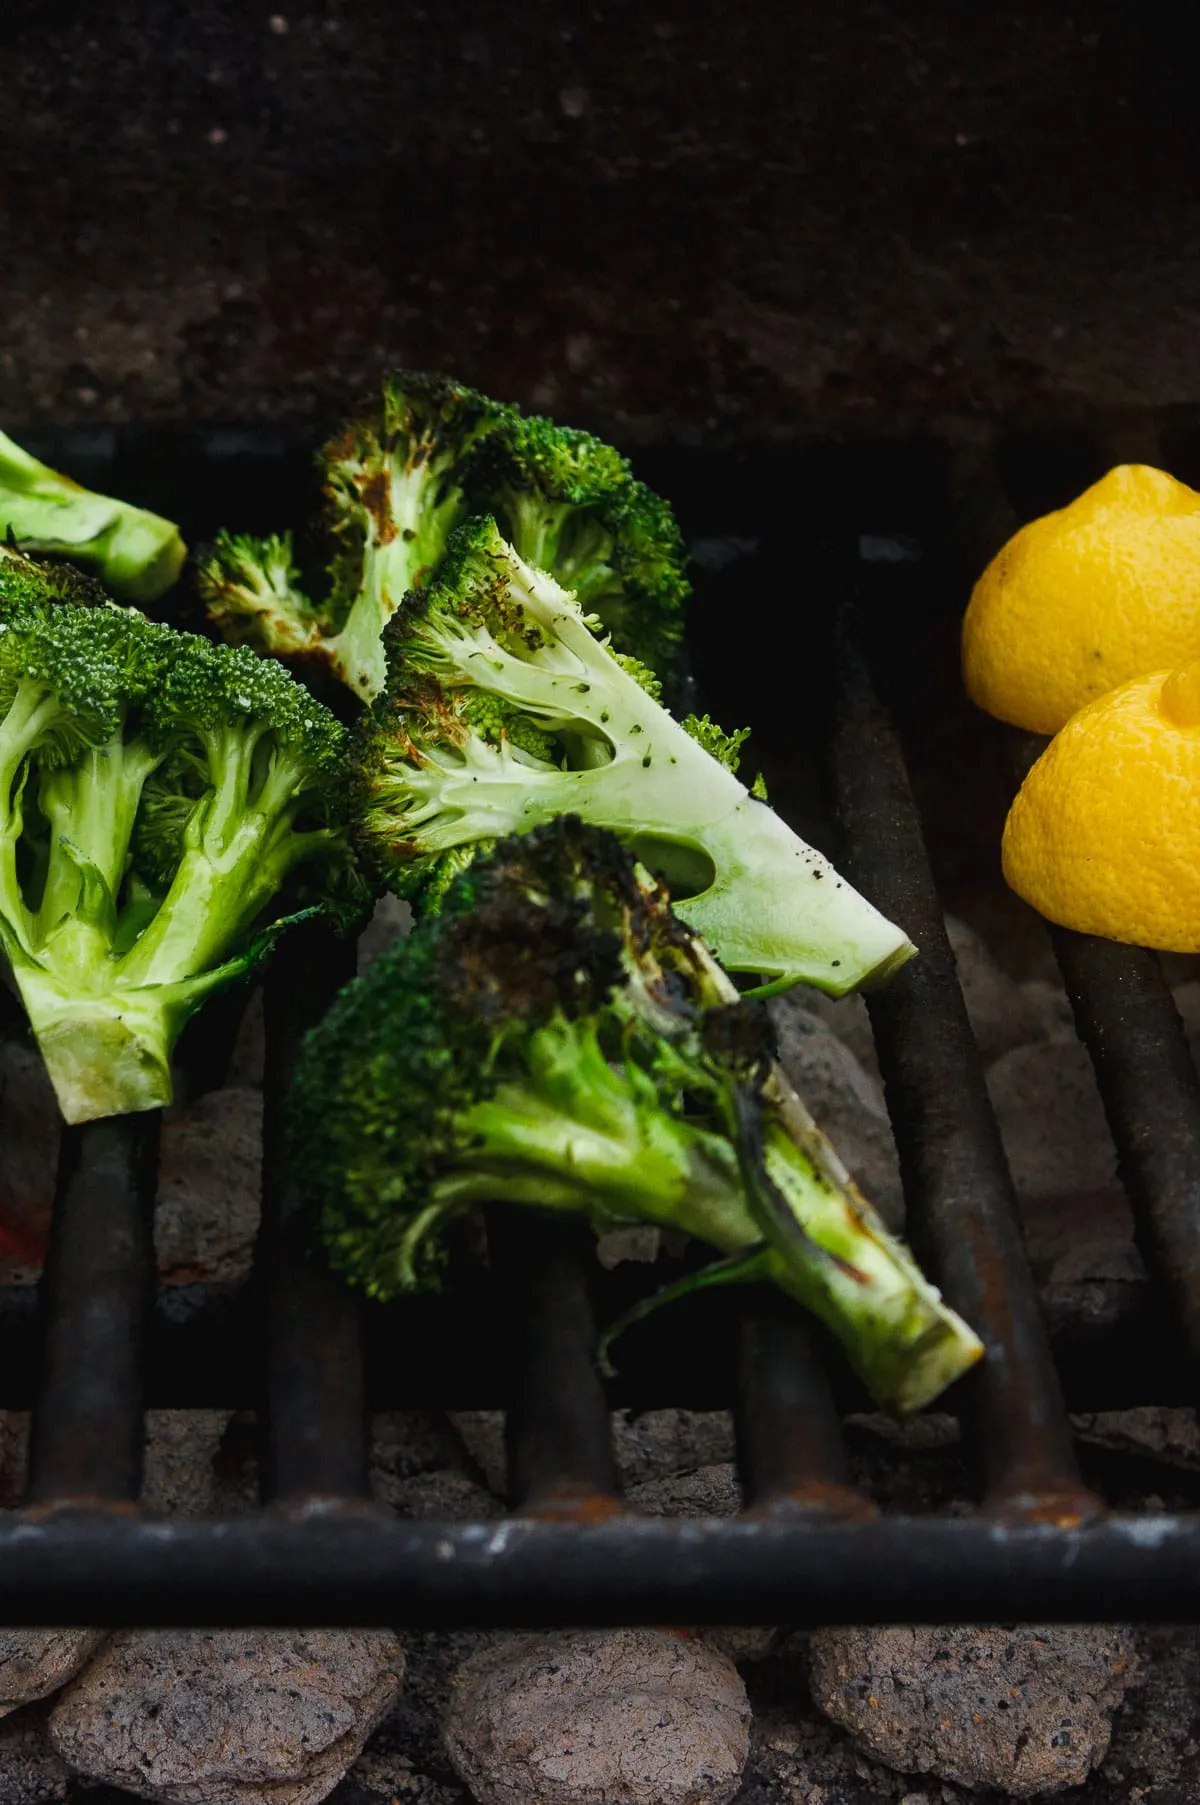 Grilled broccoli that is tossed in a zesty, charred lemon and parsley sauce. A vegan grilled side dish for anytime of year. #grilledbroccoli #grilledlemon #charredbroccoli